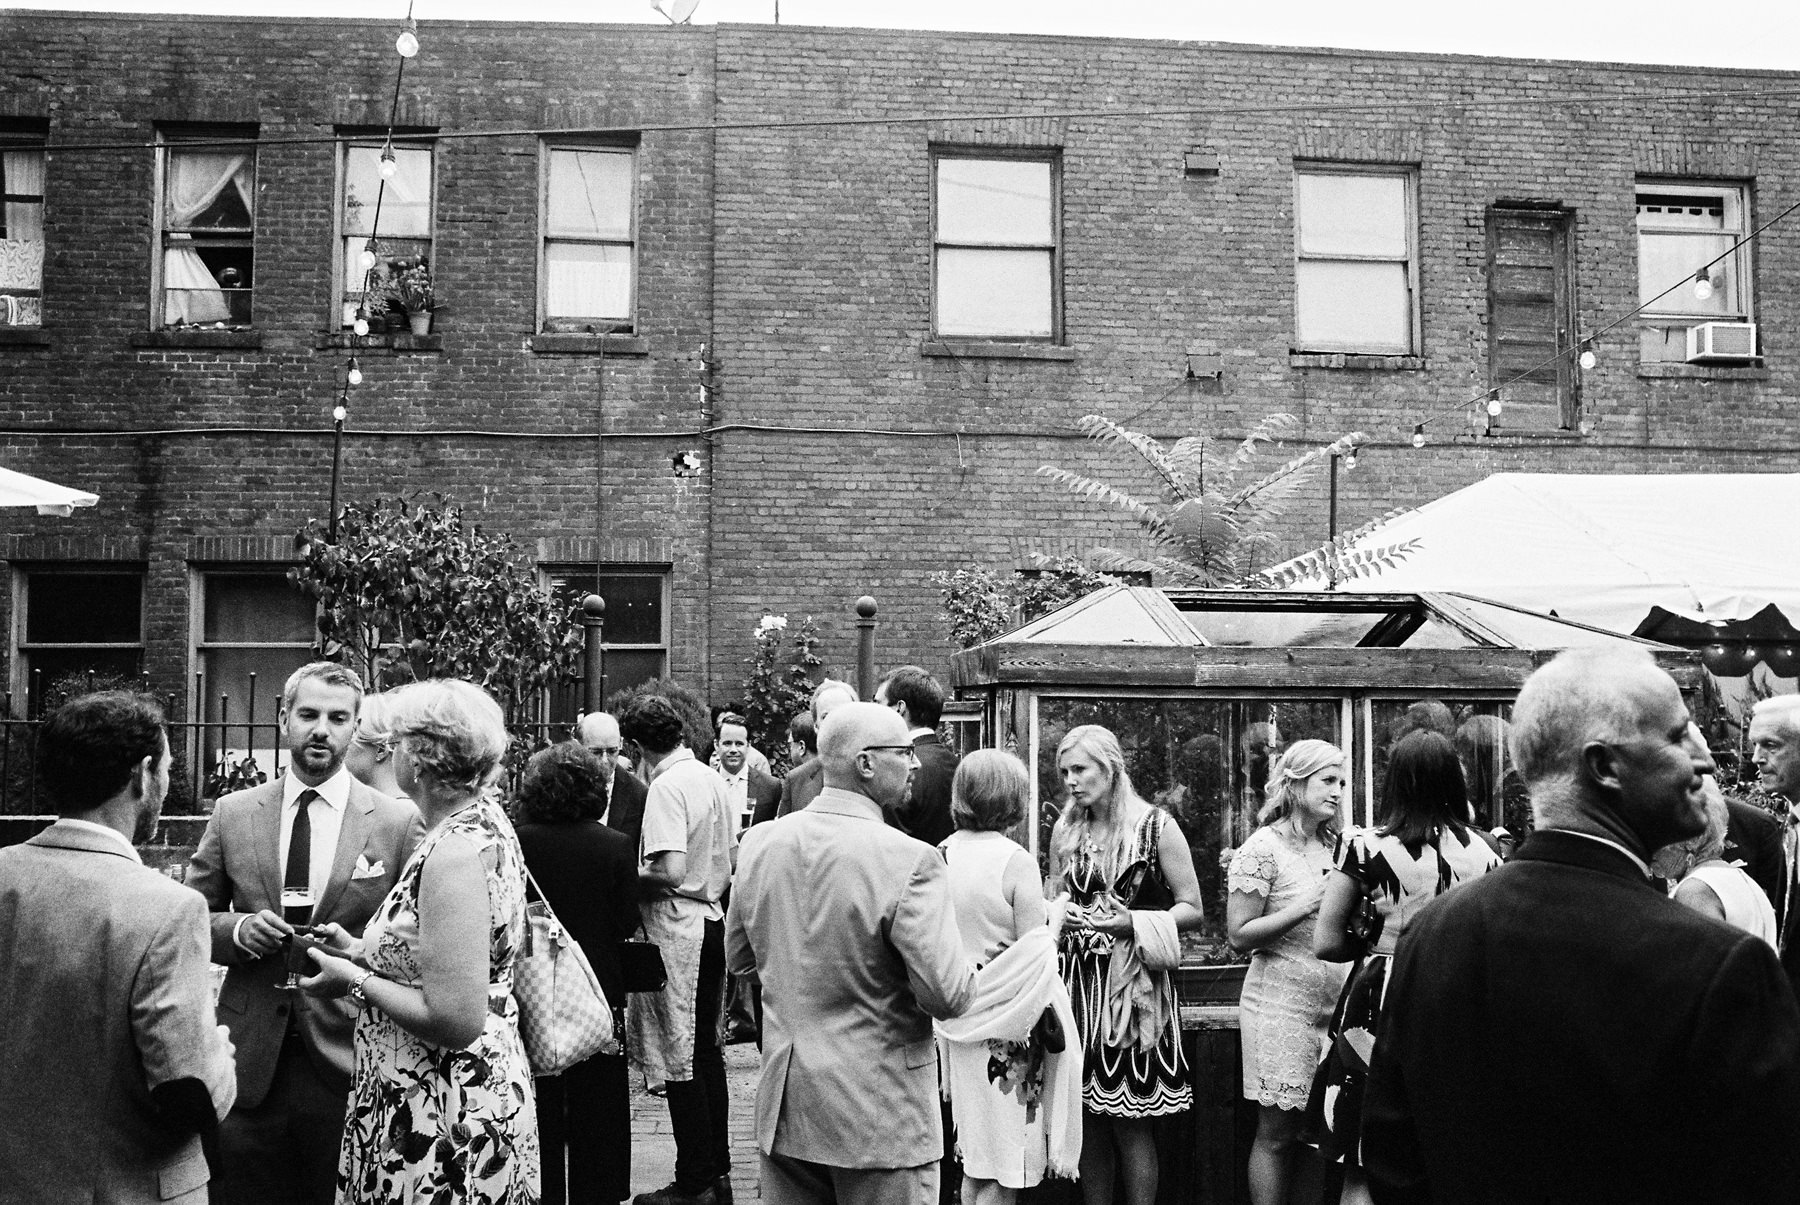 245-wedding-reception-in-the-alley-outside-the-corson-building.jpg